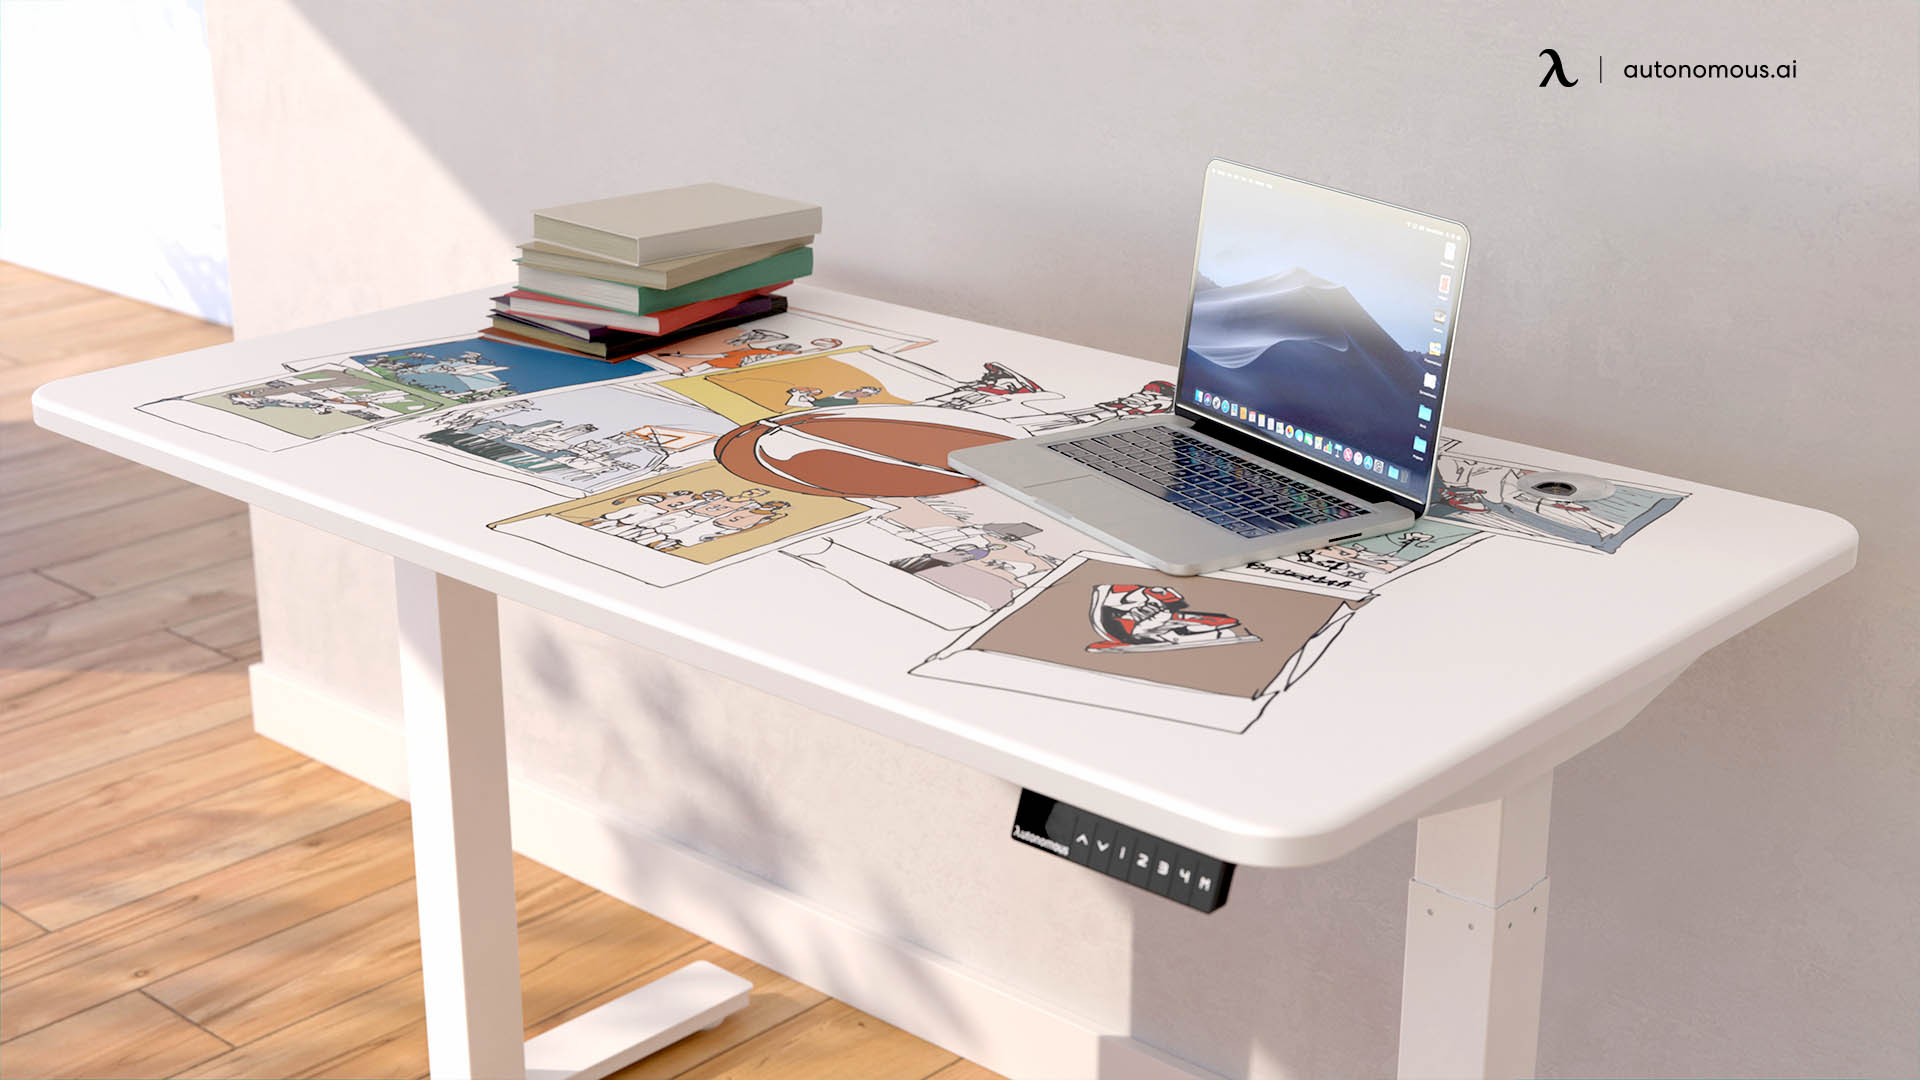 Why Use a Painted Table Top Desk For Designers?